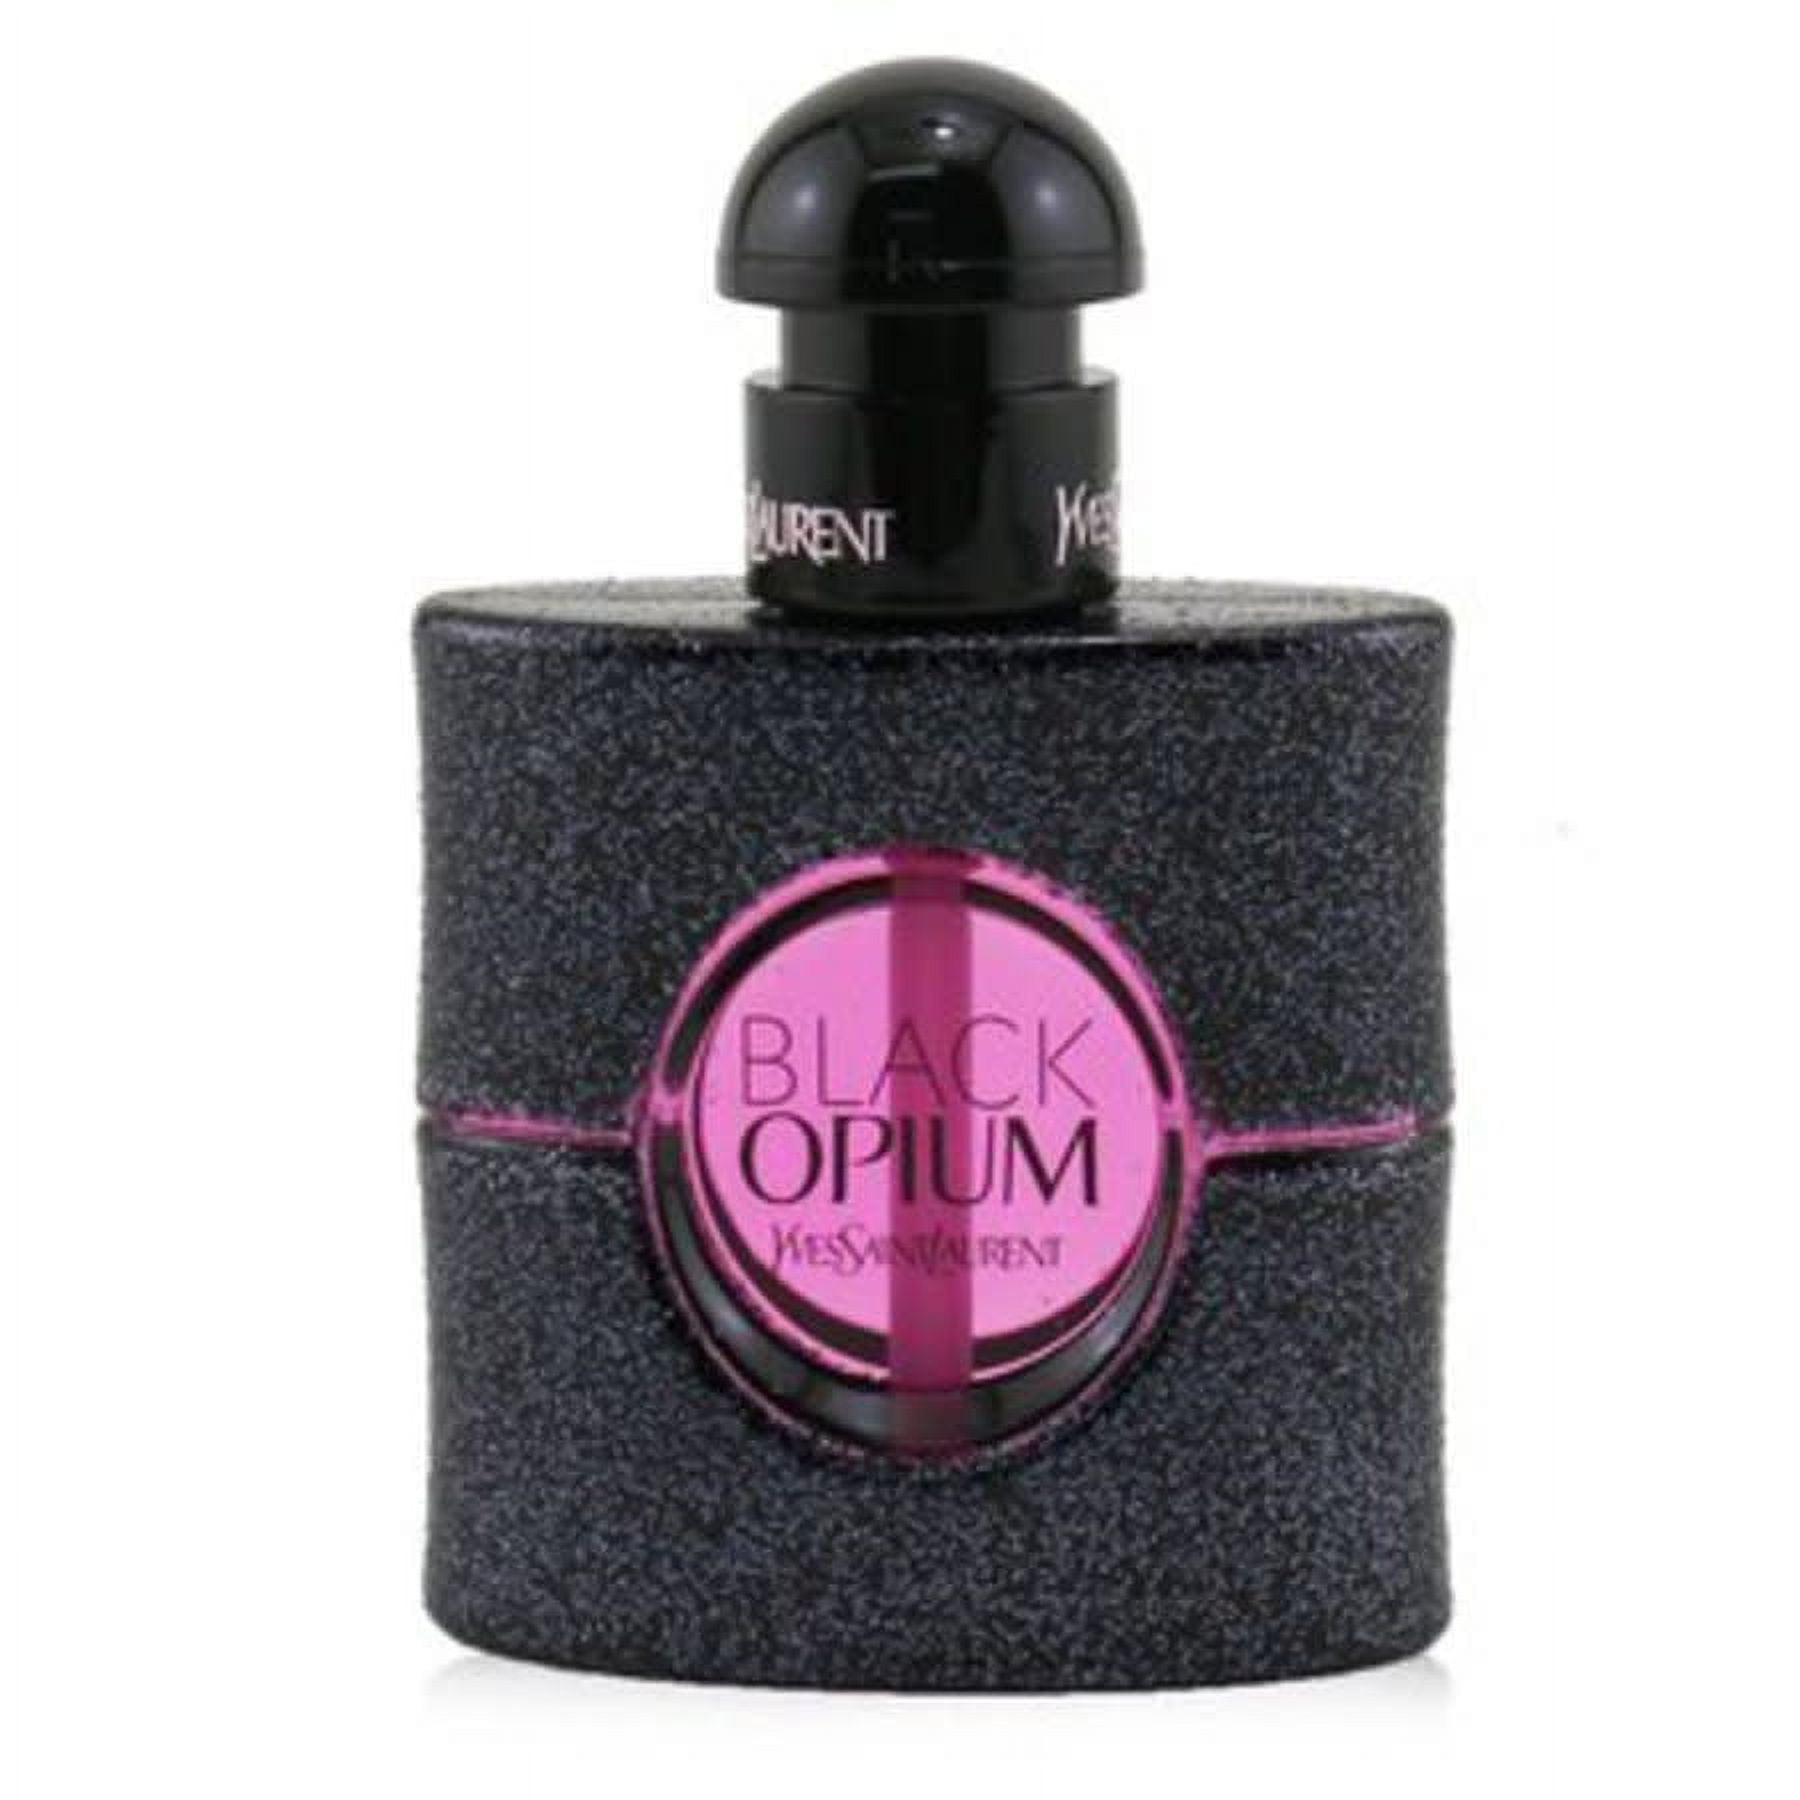 Black Opium le Parfum by YSL was released in 2022 and is warmer